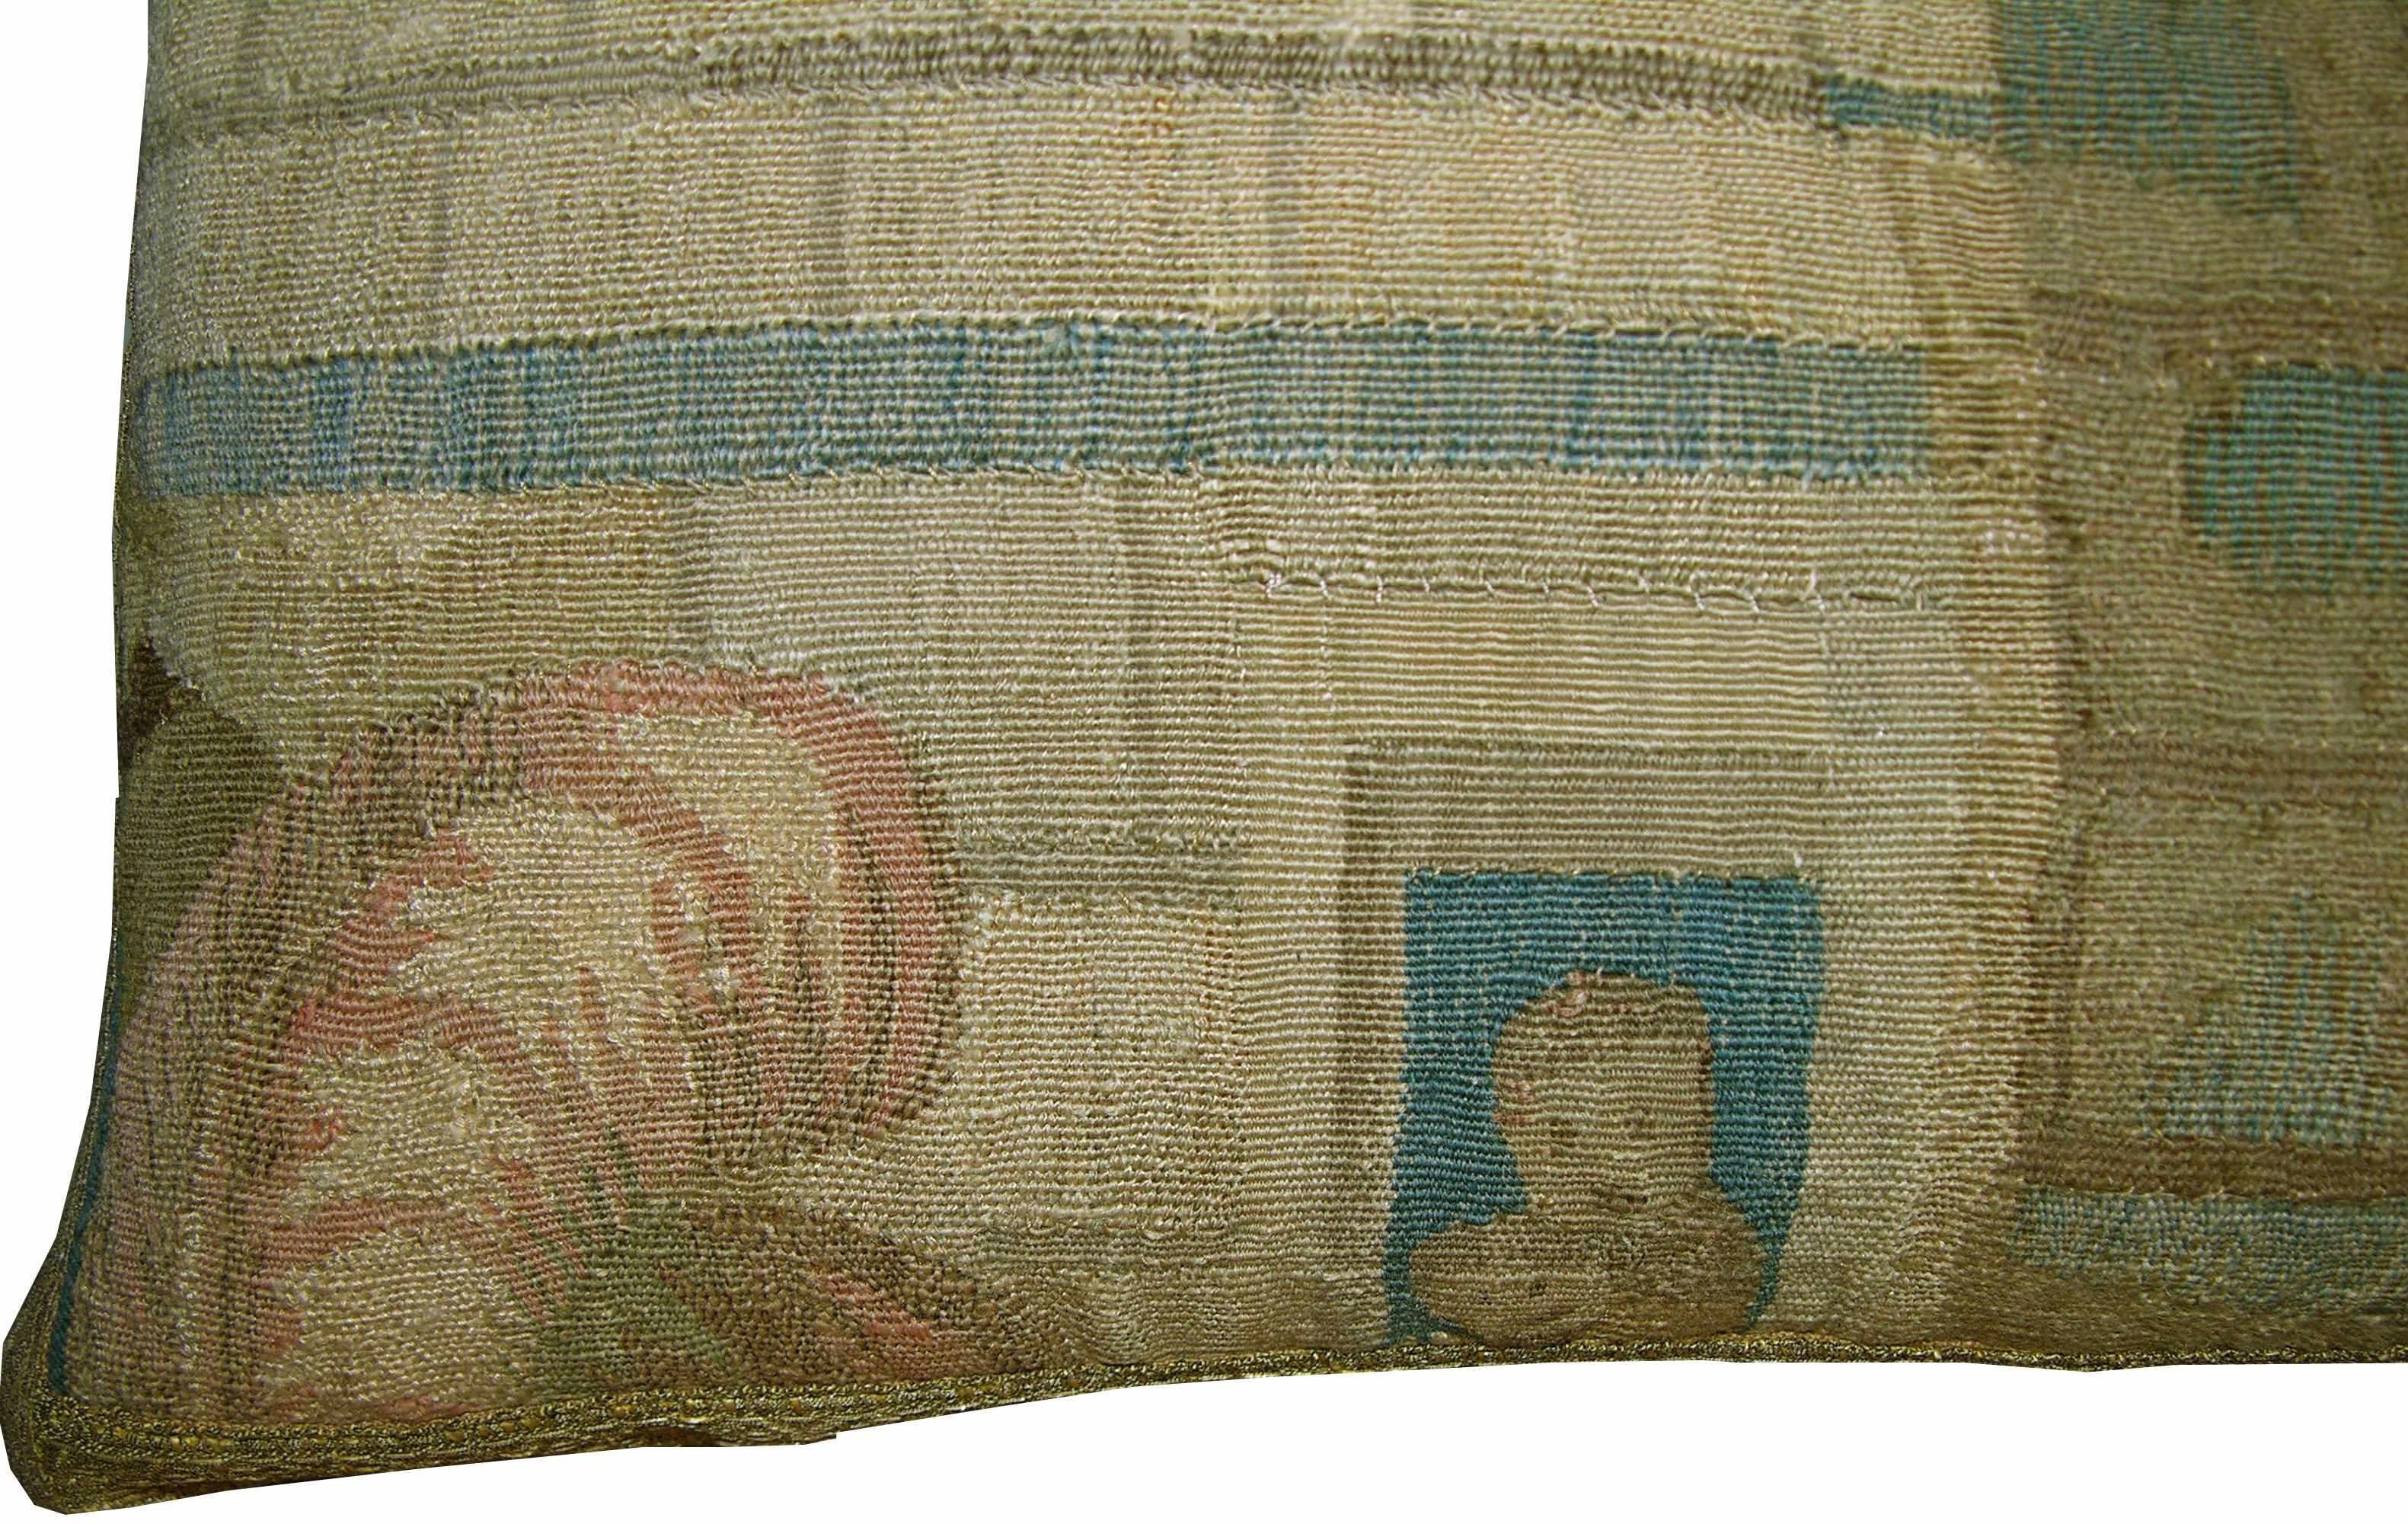 Antique Brussels tapestry pillow circa 17th century 1766p.